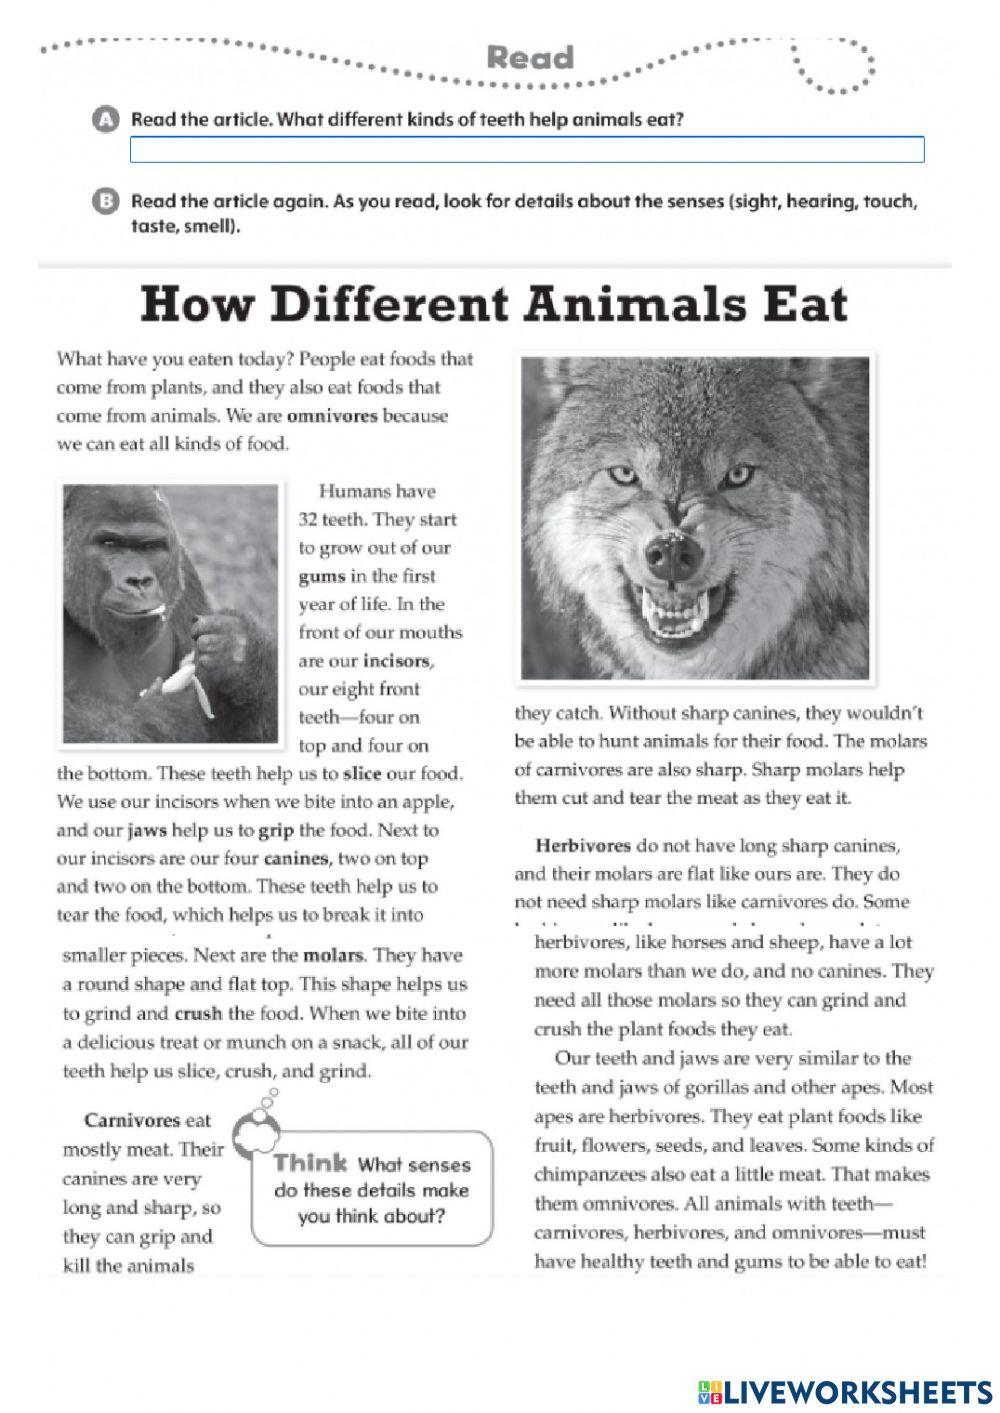 How do different animals eat? reading comprehension